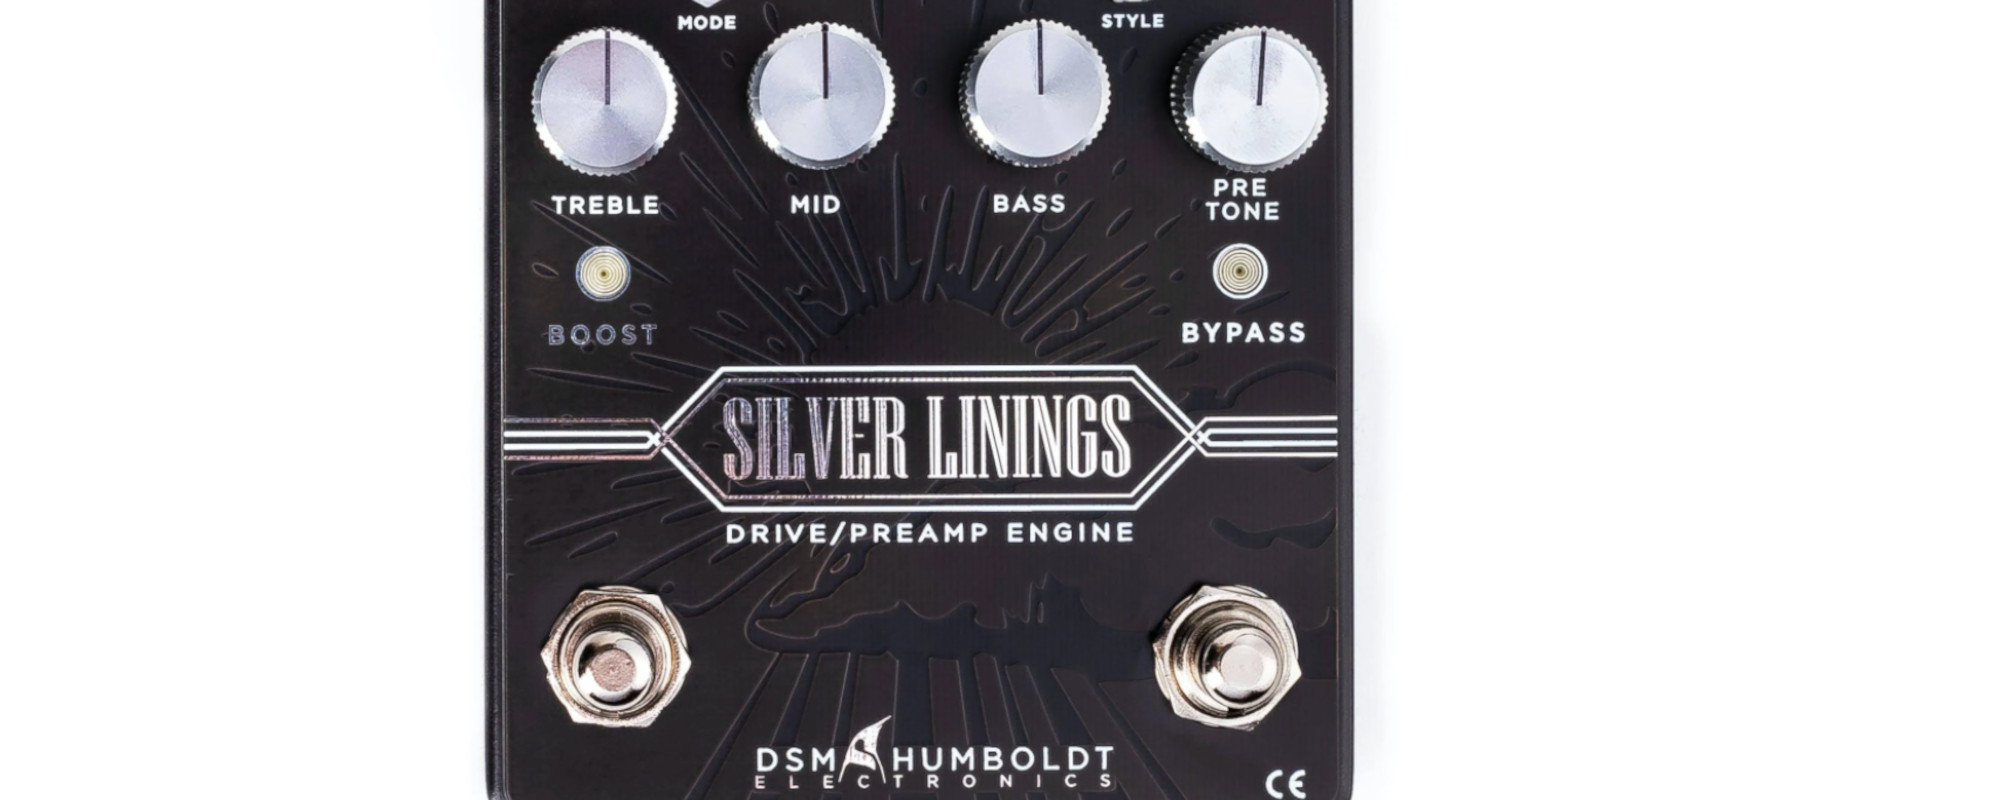 Gear Review: DSM Humboldt Electronics Silver Linings Drive/Preamp Engine￼